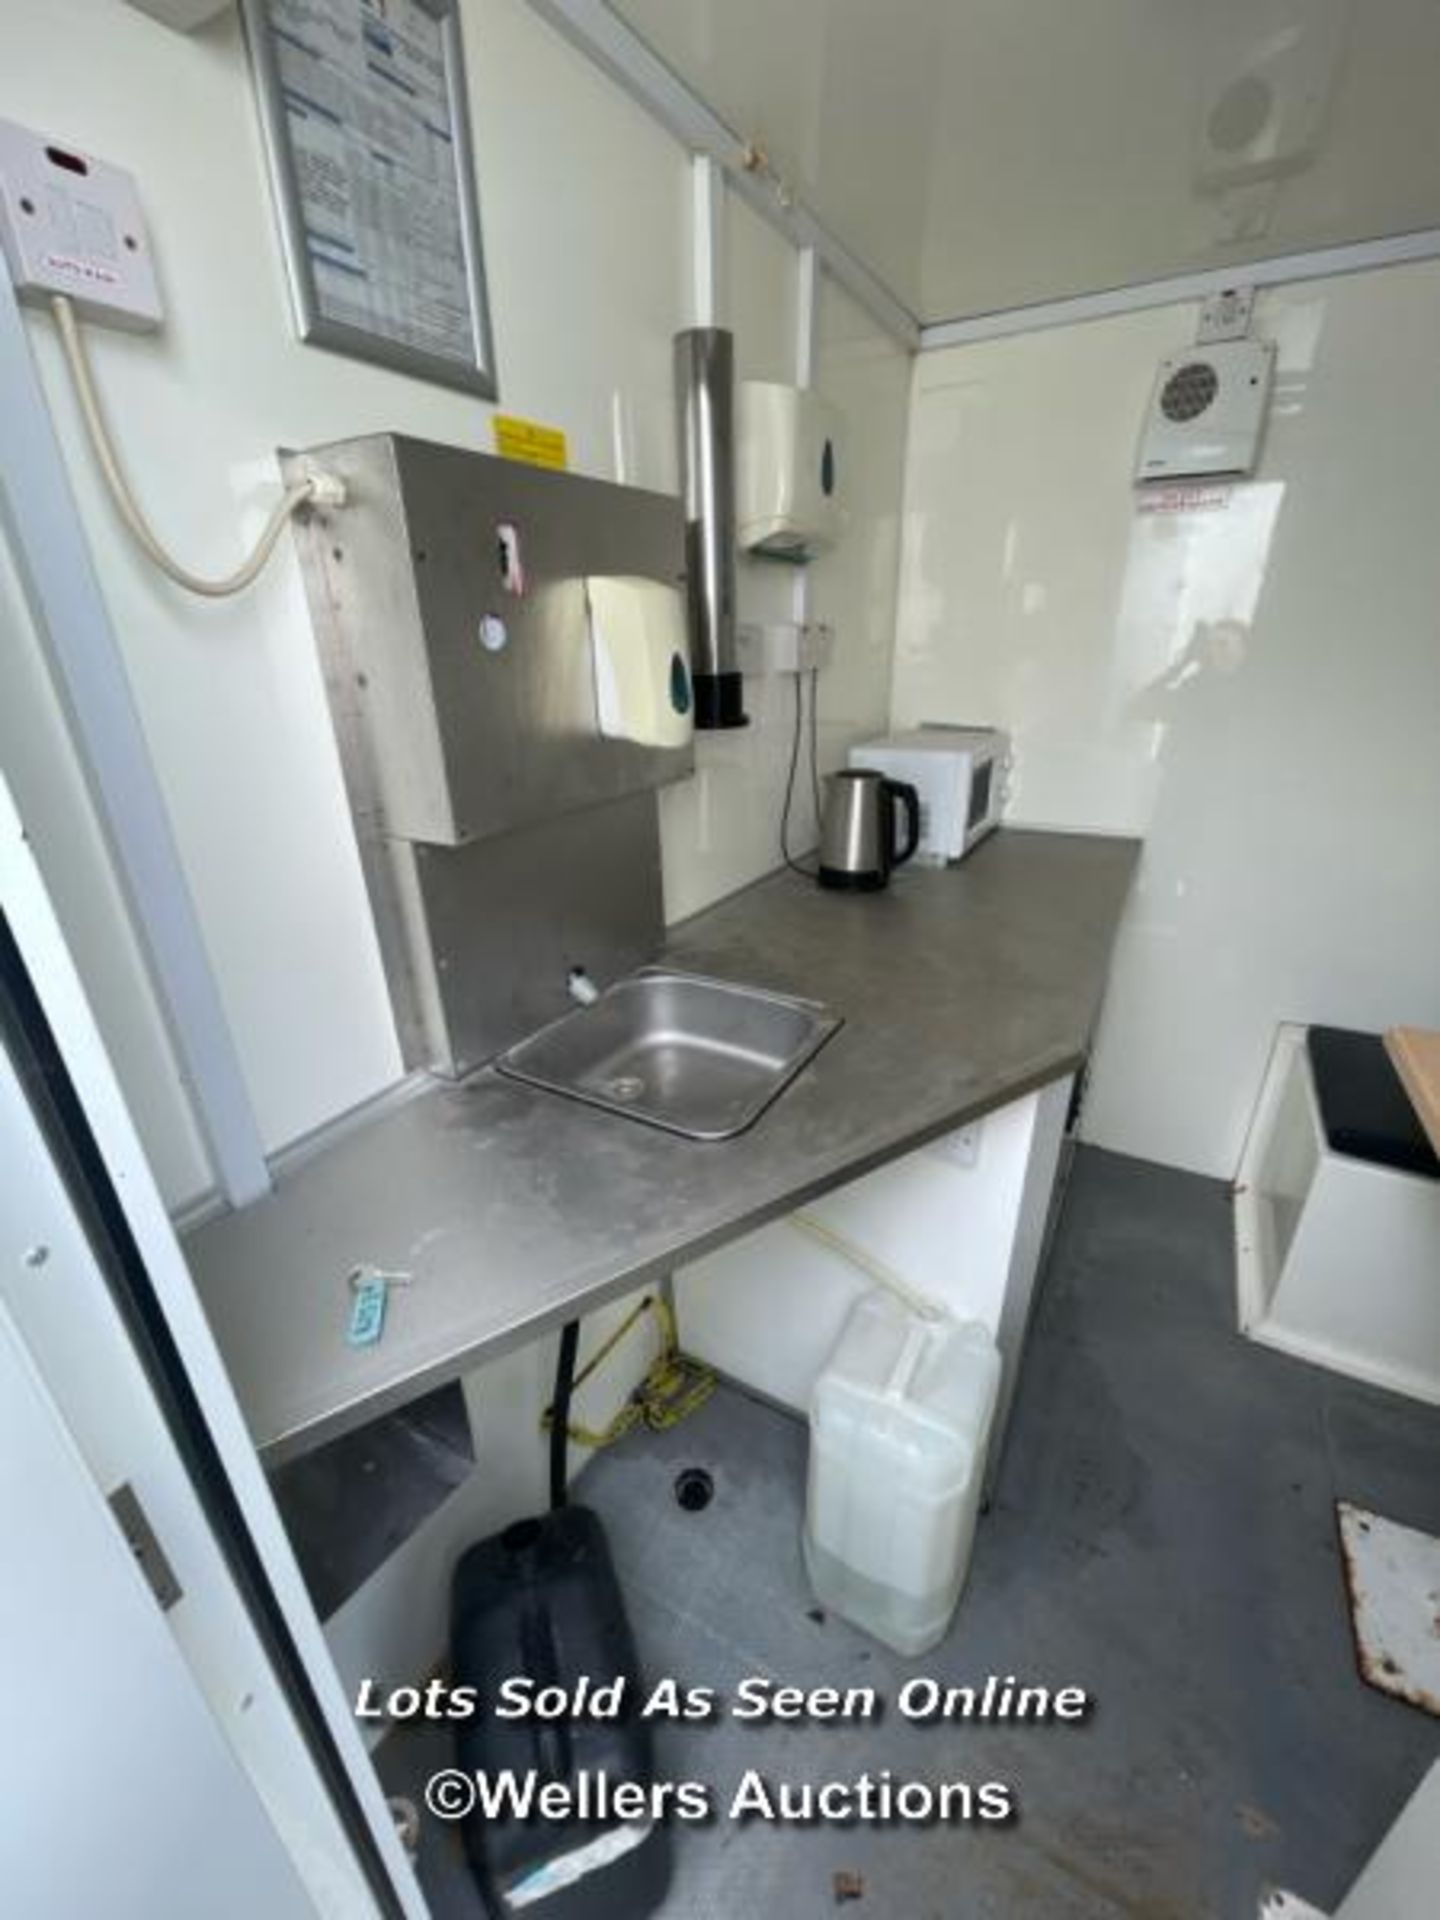 6 PERSON 12 X 7.5FT AJC EASY CABIN TOWABLE WELFARE UNIT, INCLUDES WASH BASIN, KETTLE, MICROWAVE, - Image 7 of 15